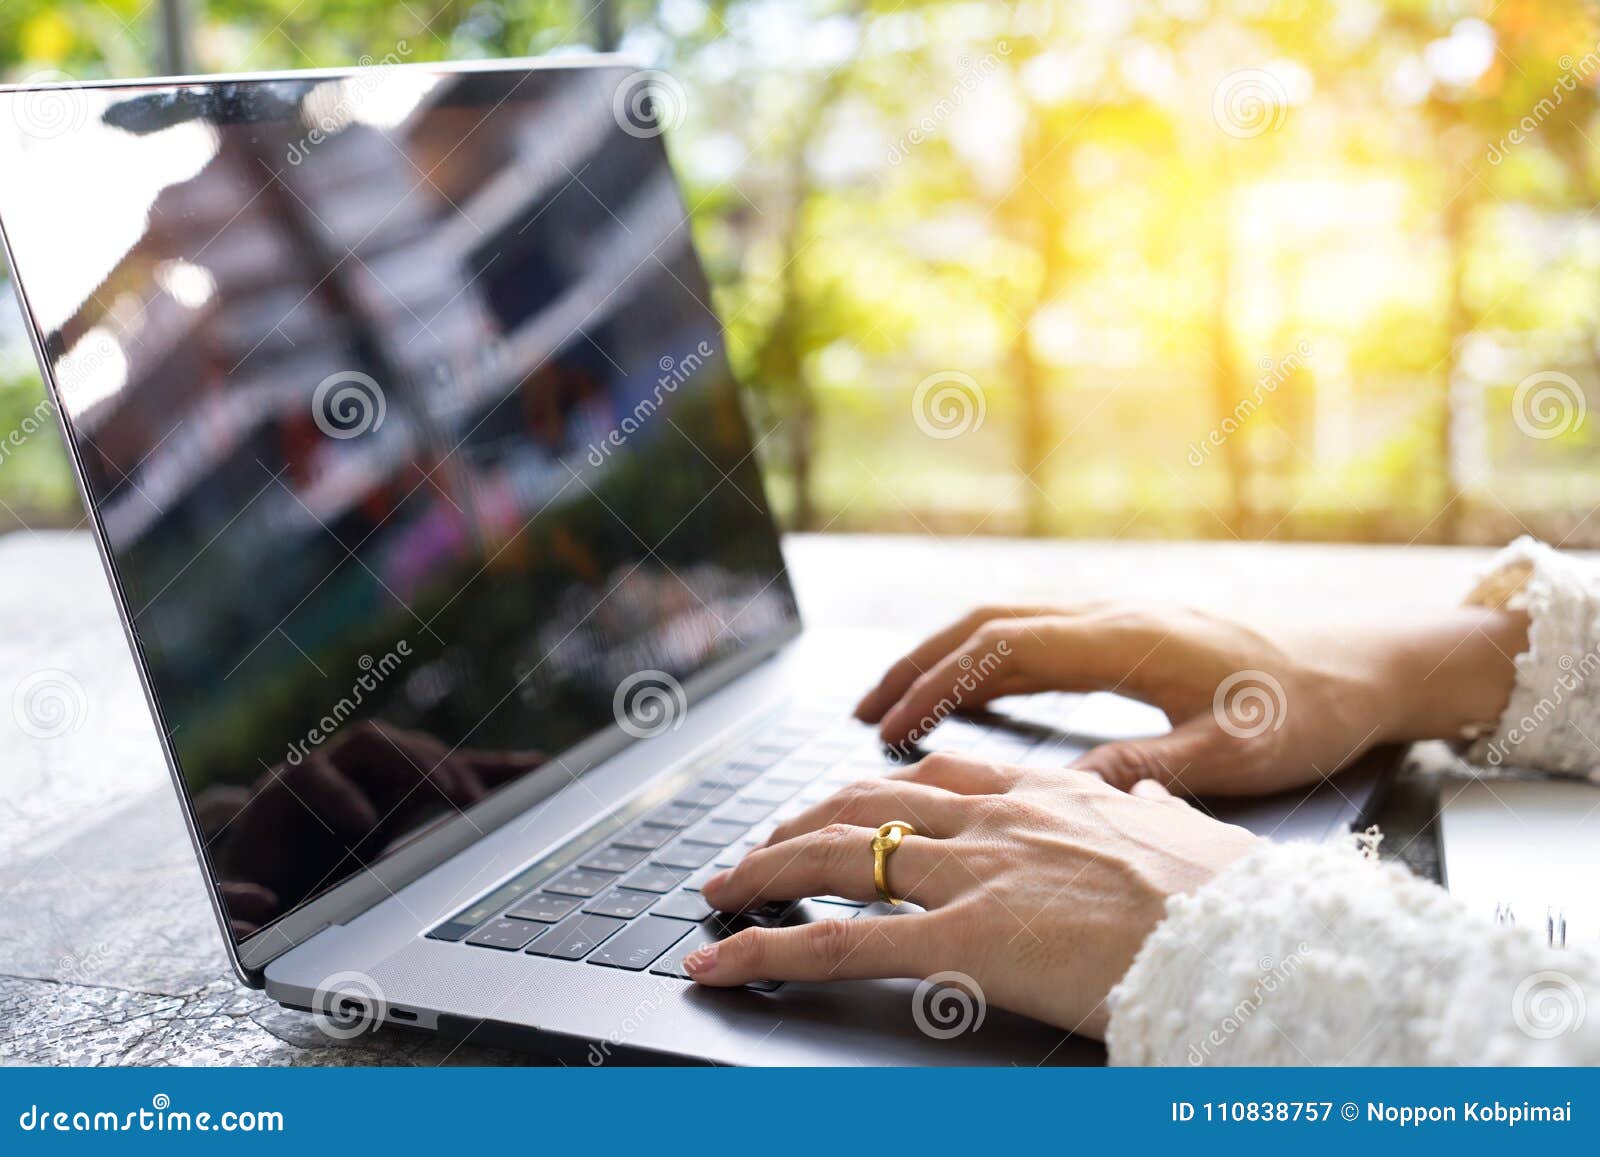 closeup business woman hands typing on laptop keyboard on desk.